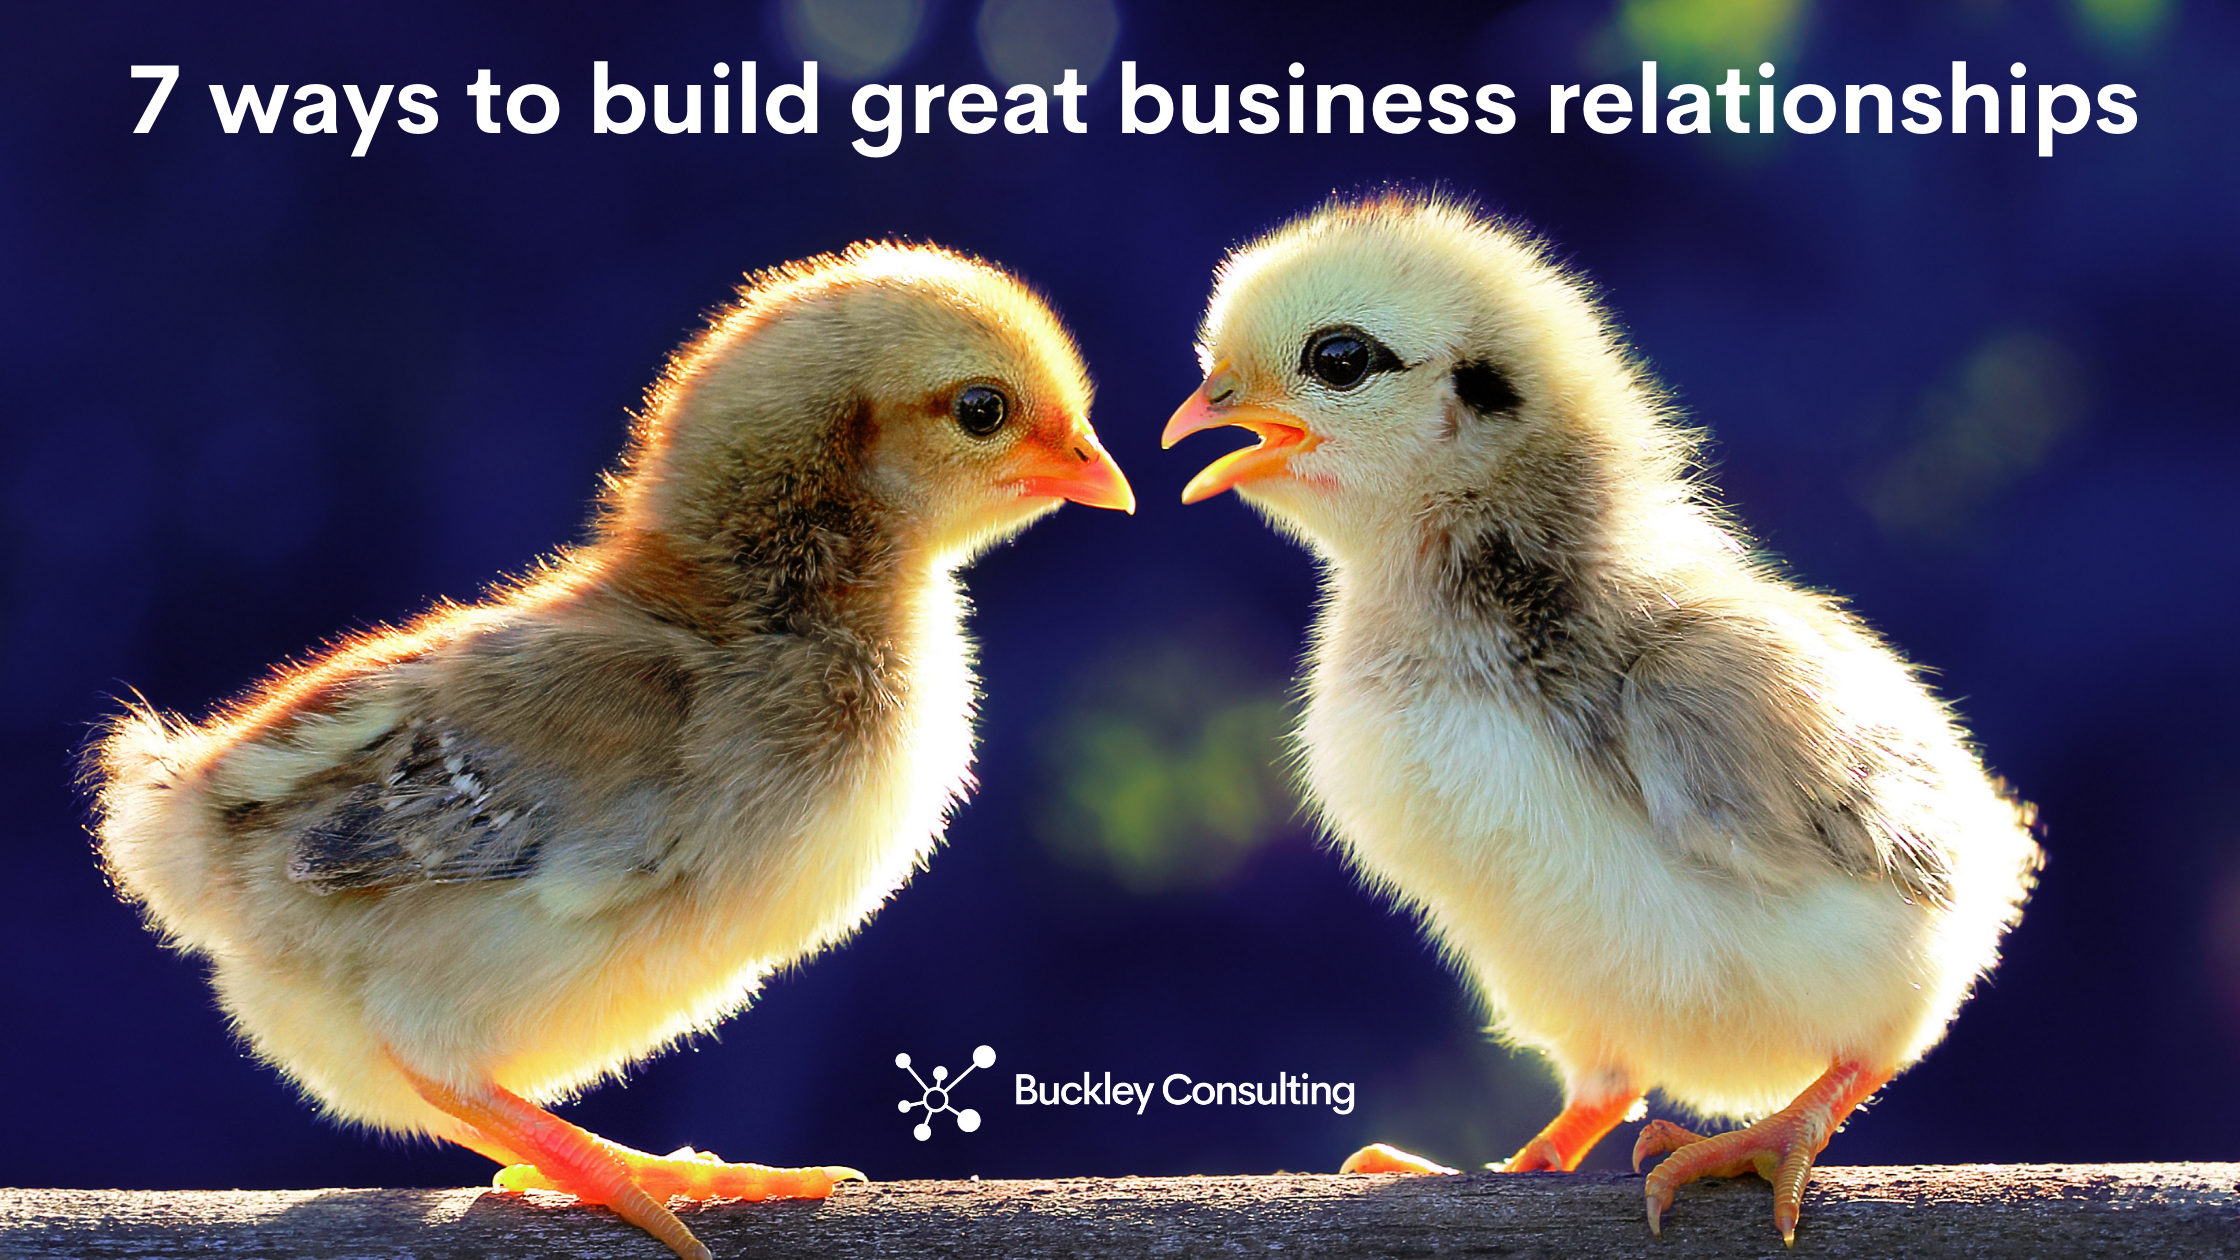 7 ways to build great business relationships